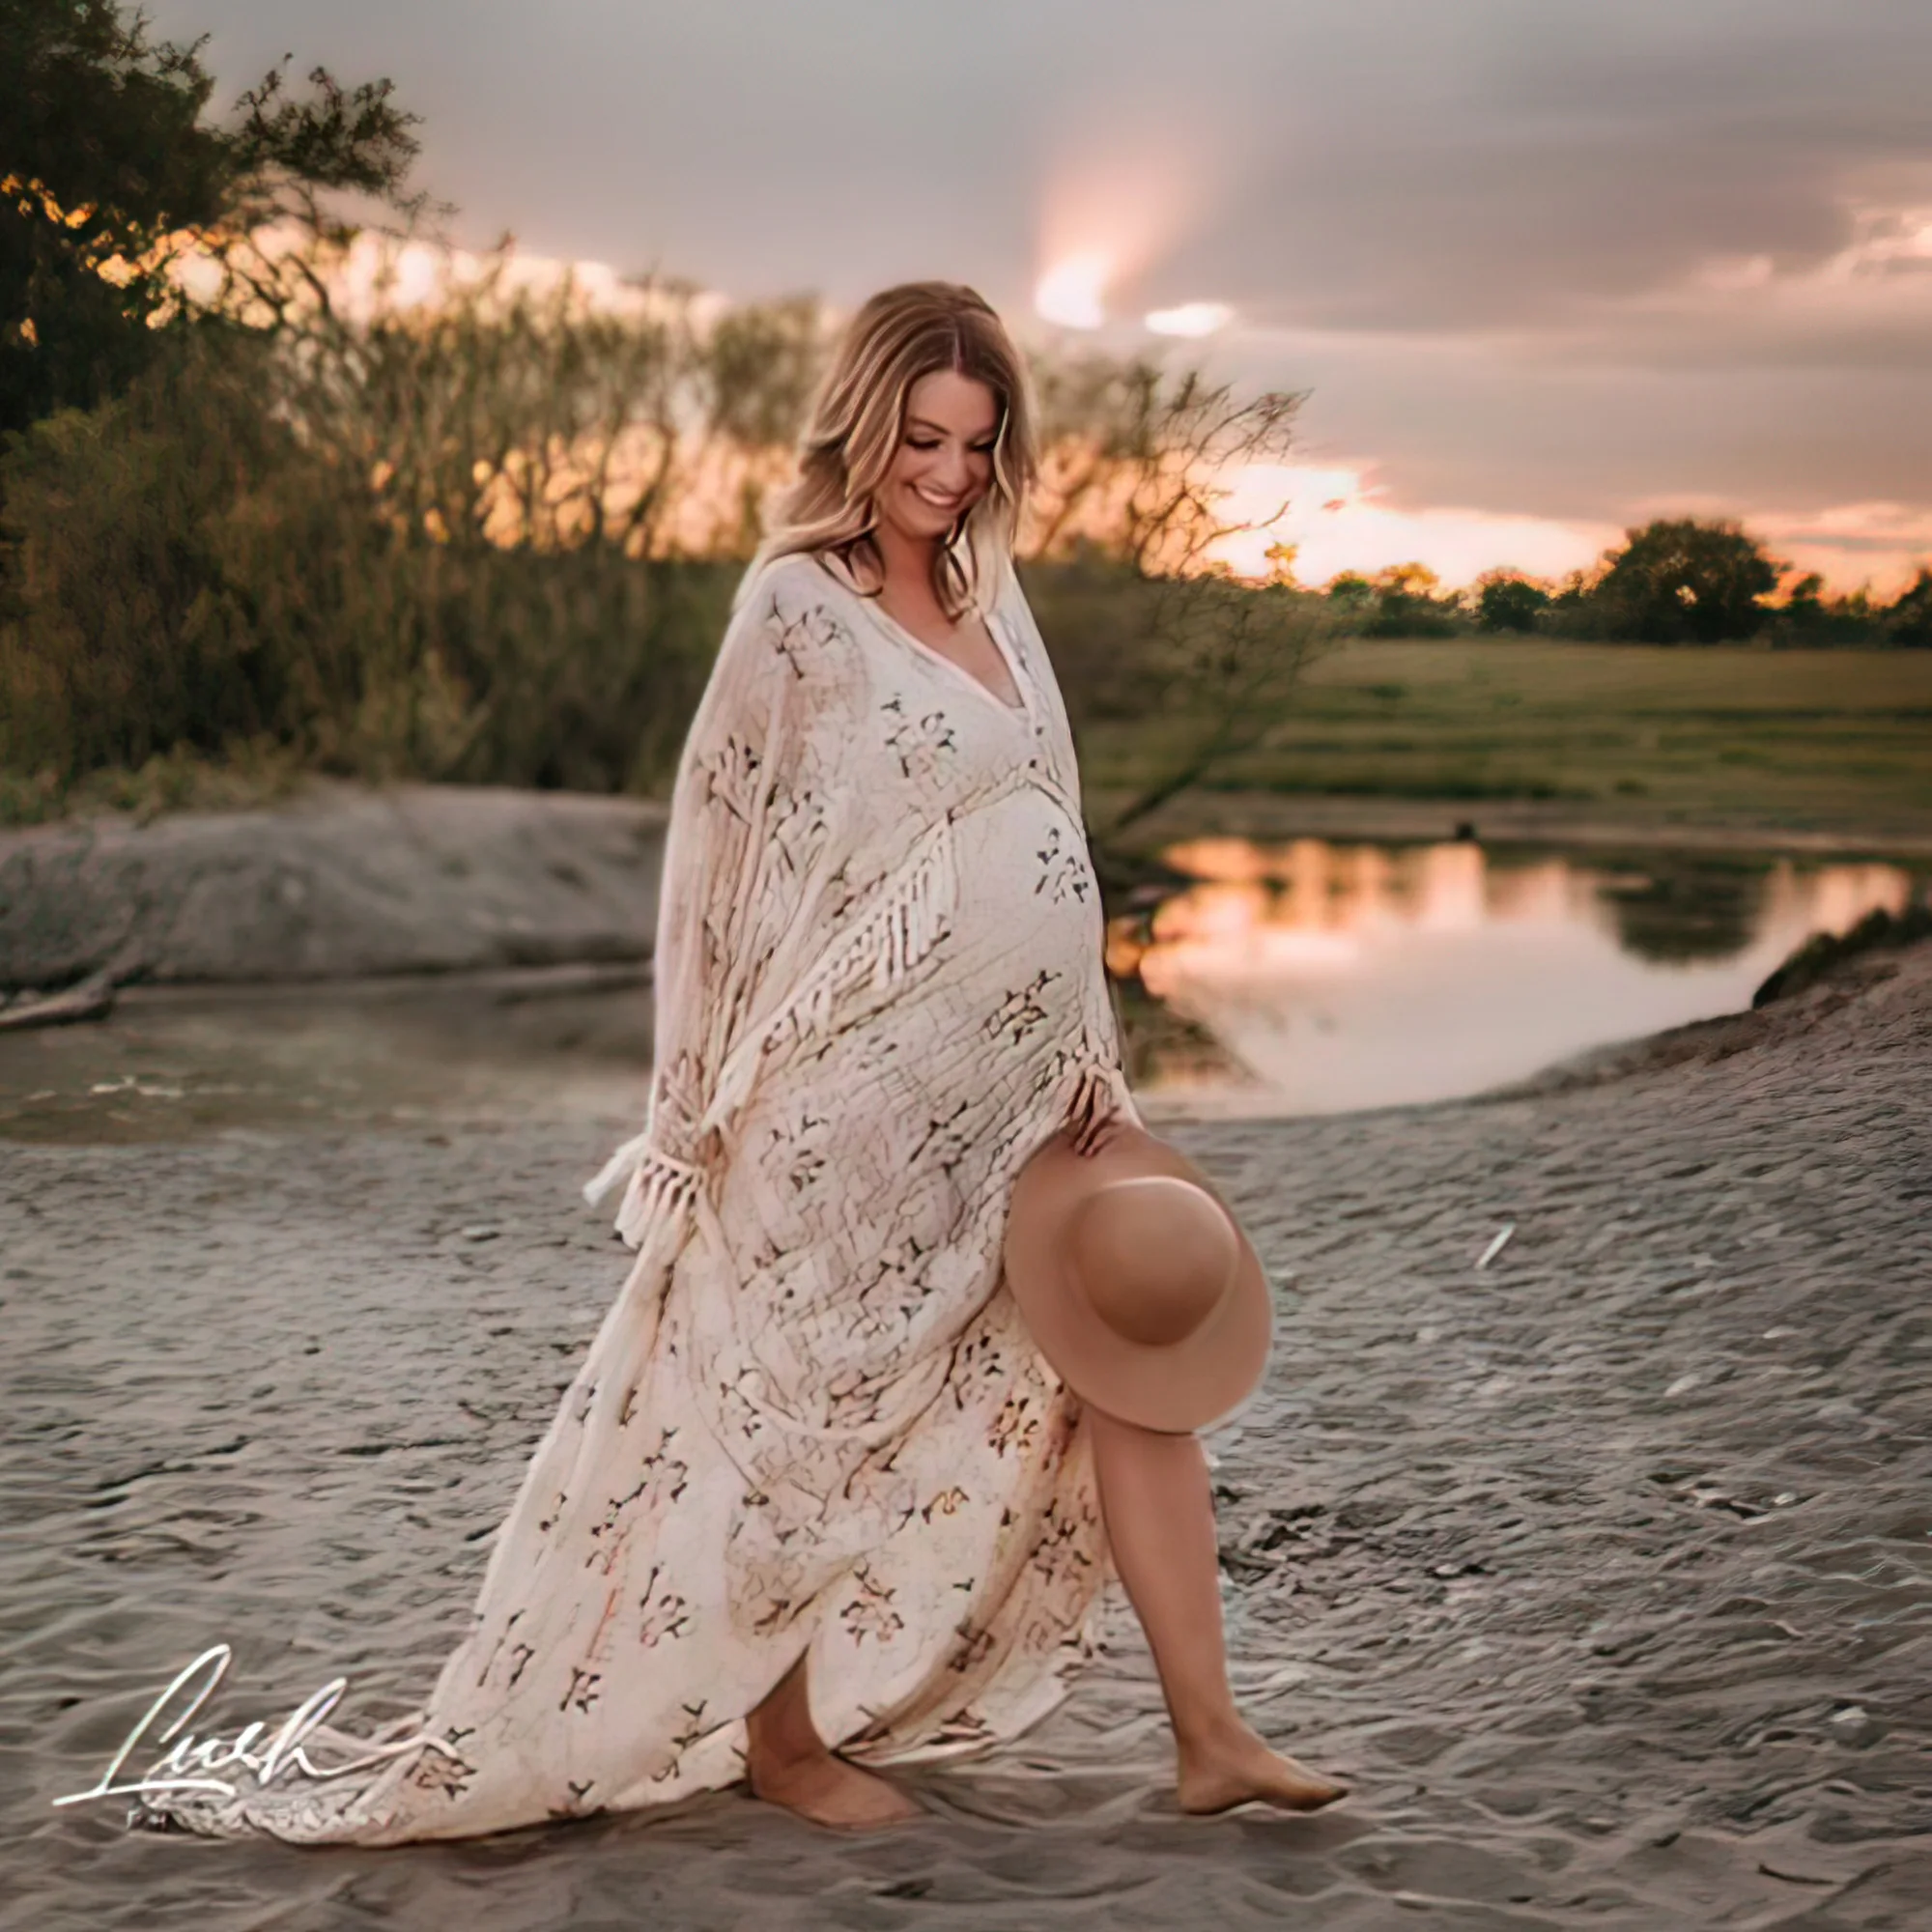 Boho Lace Photo Shoot Pregnant Robe Maternity Dresses with Tassels Evening Party Costume for Women Photography Accessories cotton premama photography dresses props 2022 new boho maternity pregnant gown baby shower photo shoot wedding dress accessories